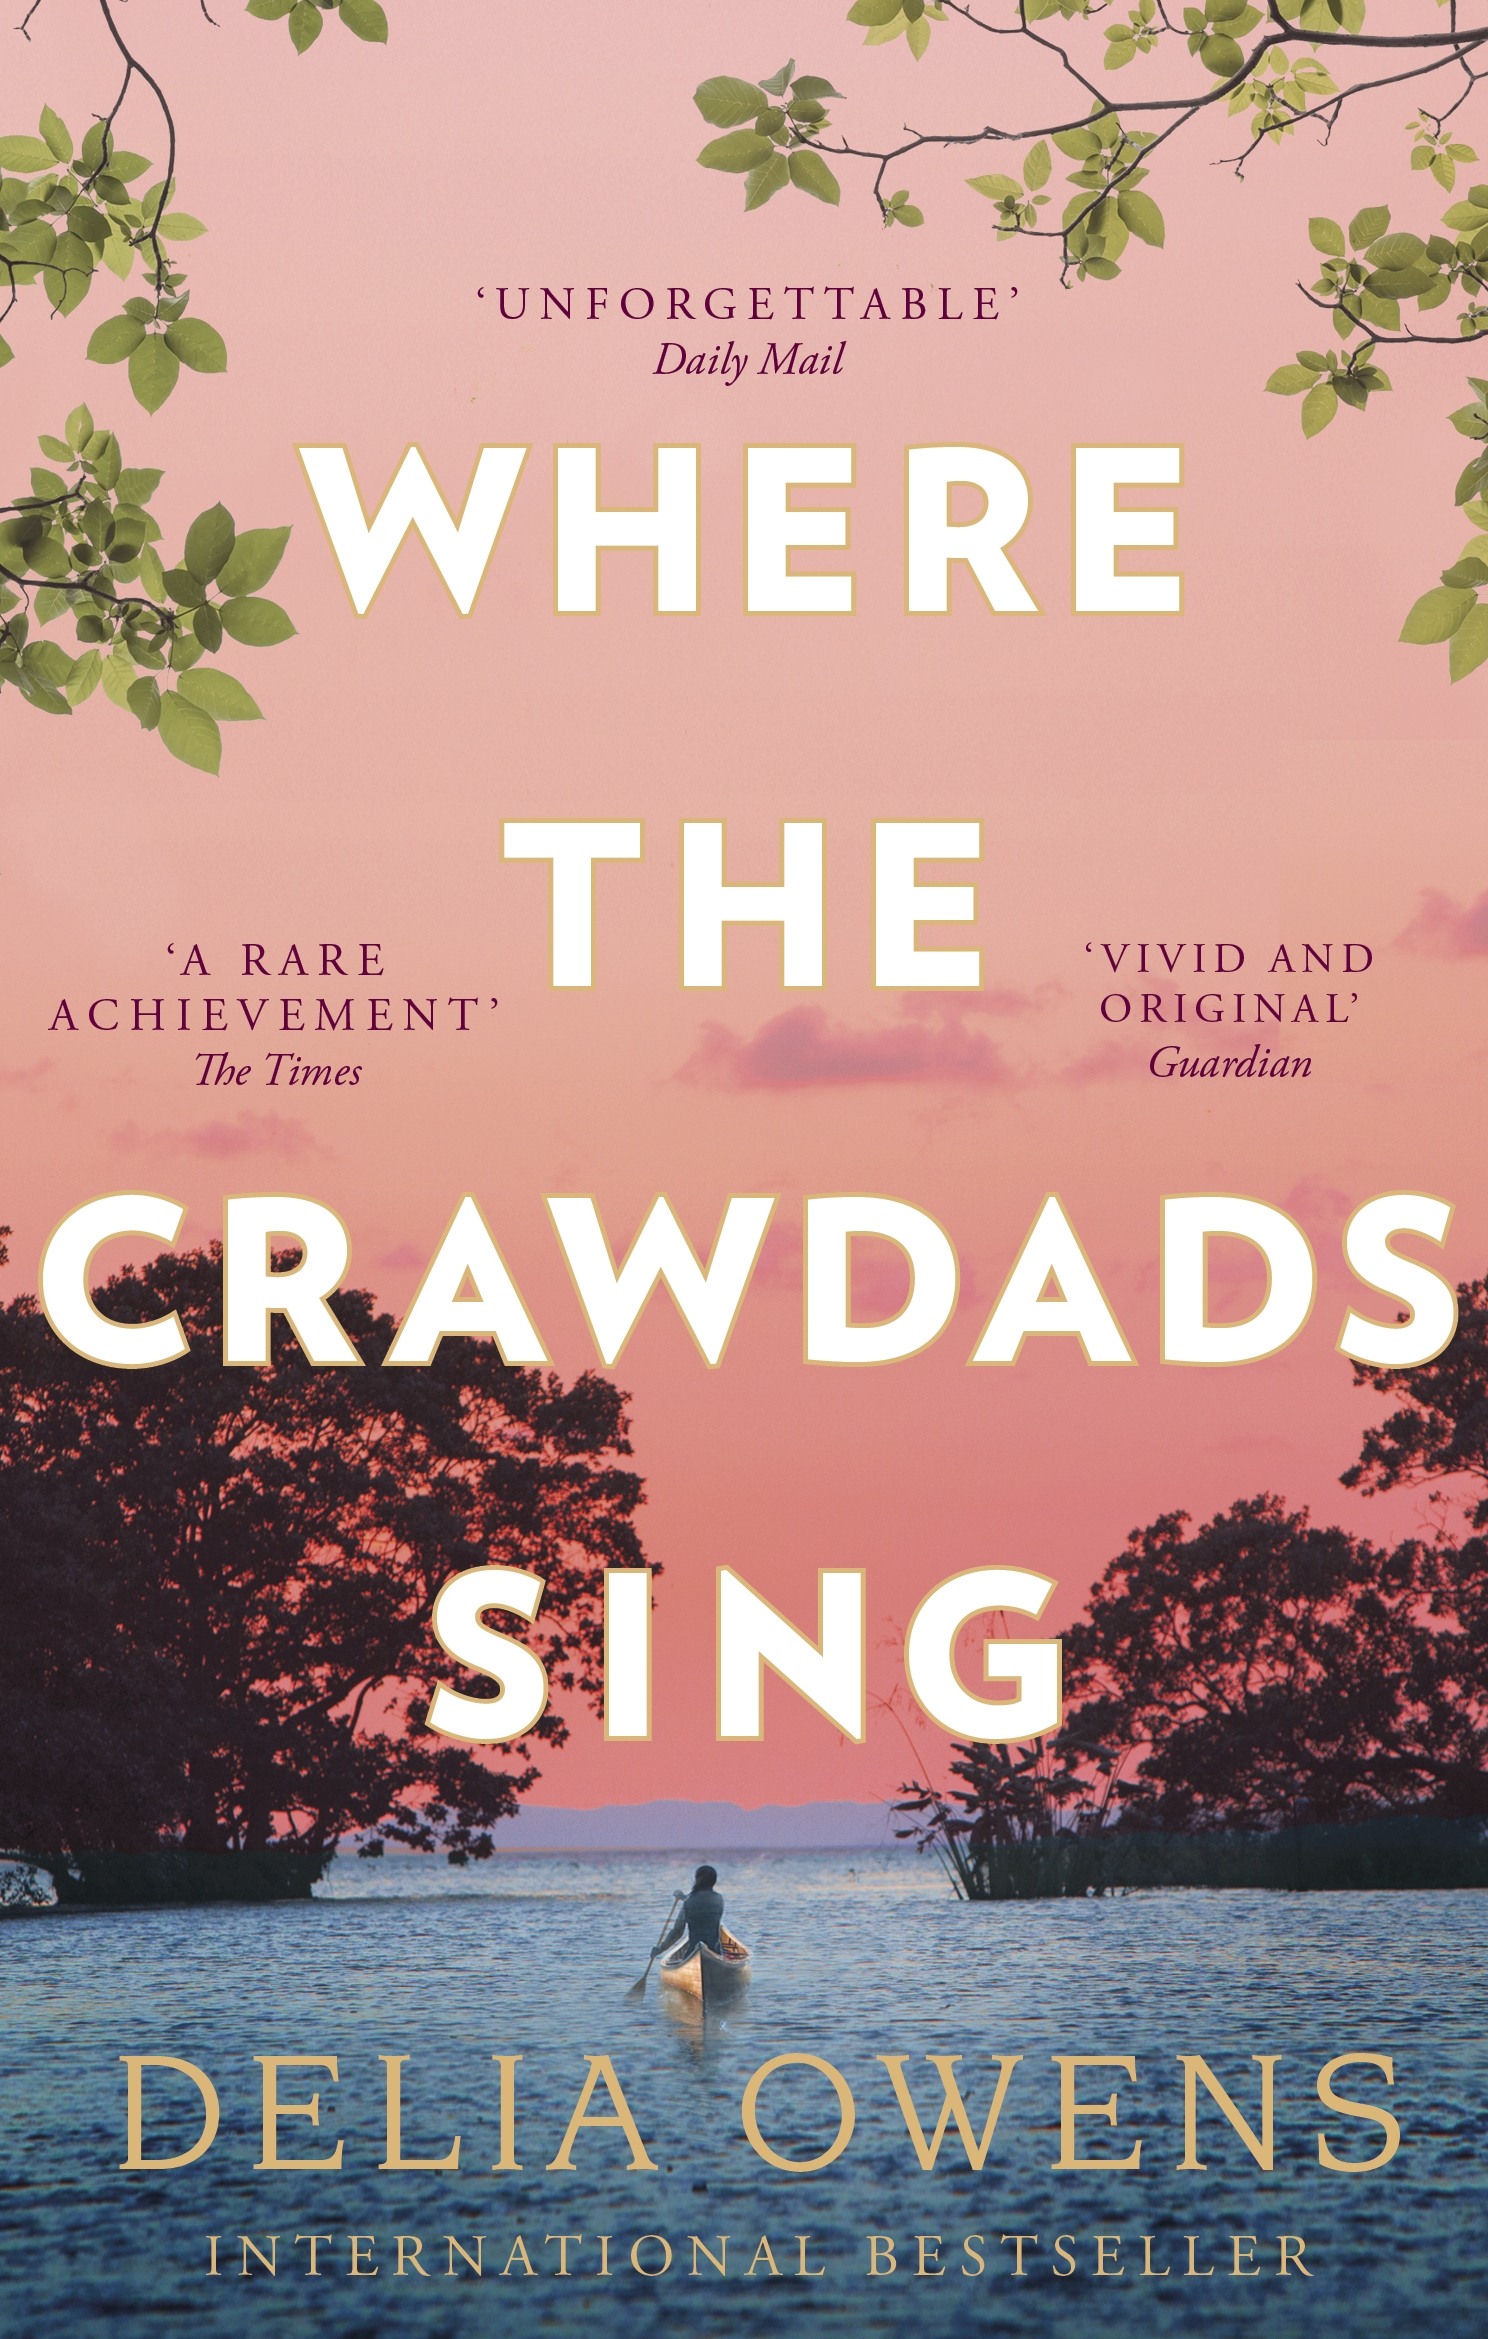 Where the Crawdads Sing cover.